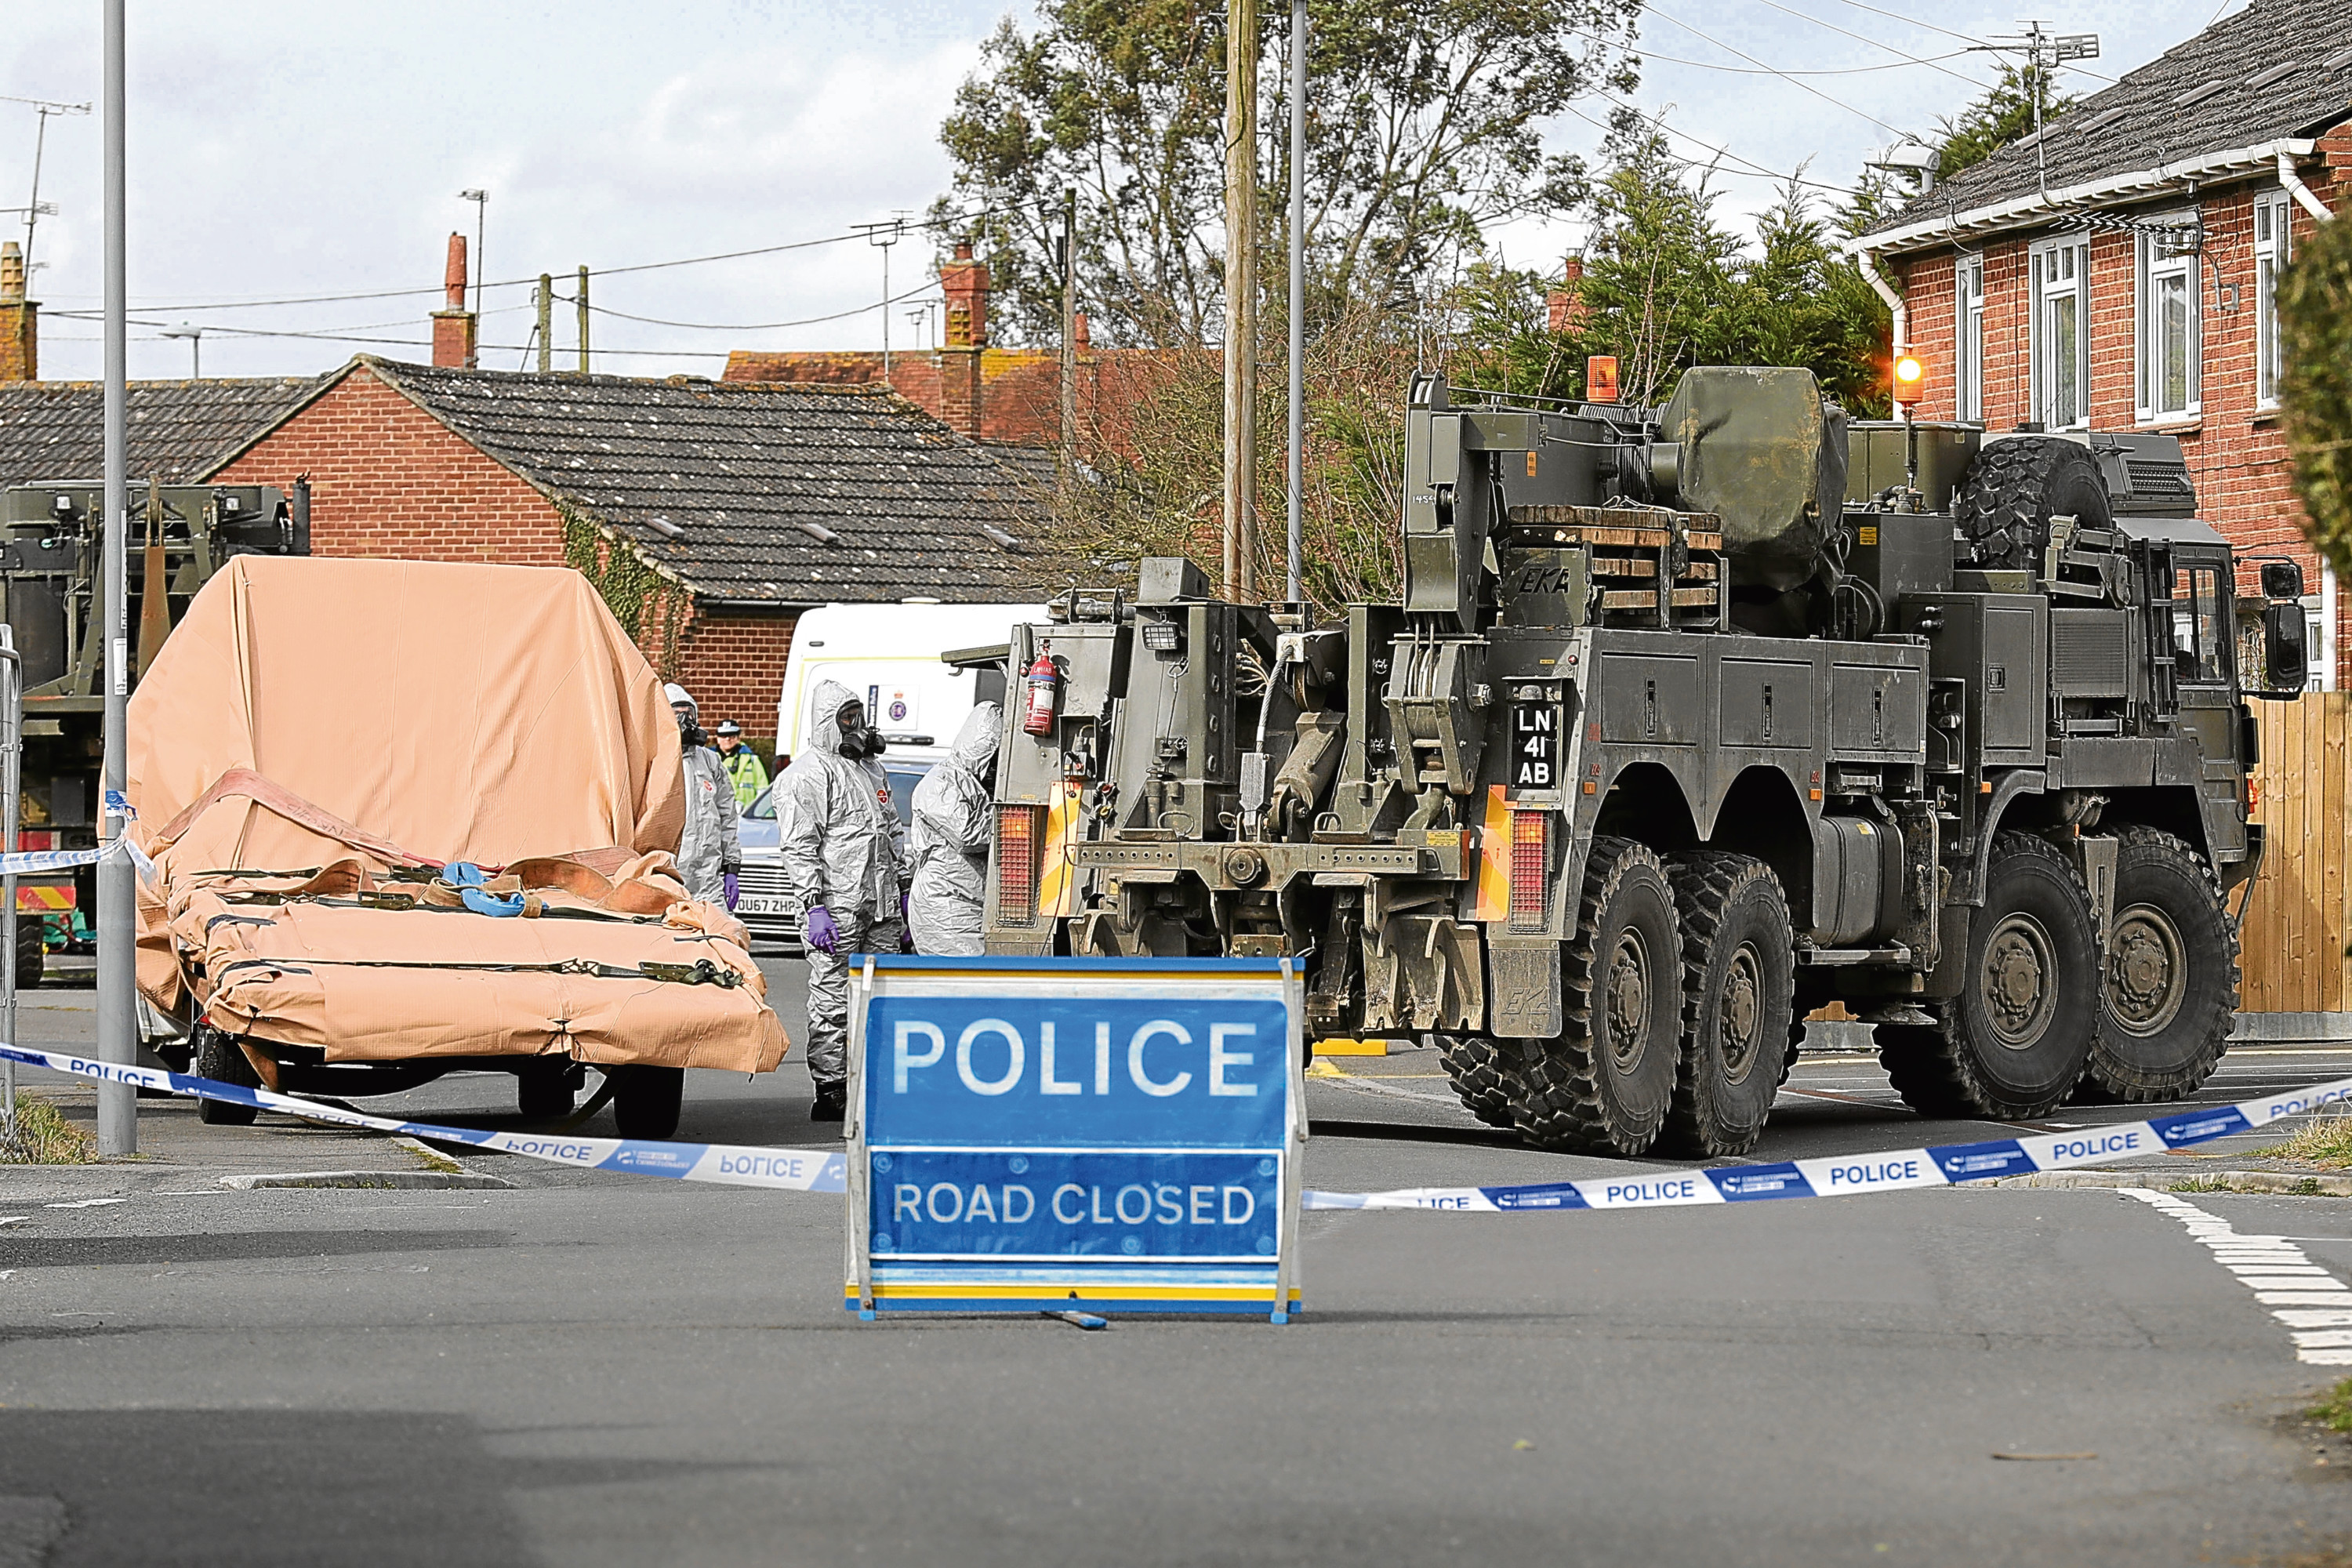 Forensic teams work at an address in Gillingham, Dorset, as they remove a recovery truck used following the Salisbury nerve agent attack on Mr Skripal and his daughter.